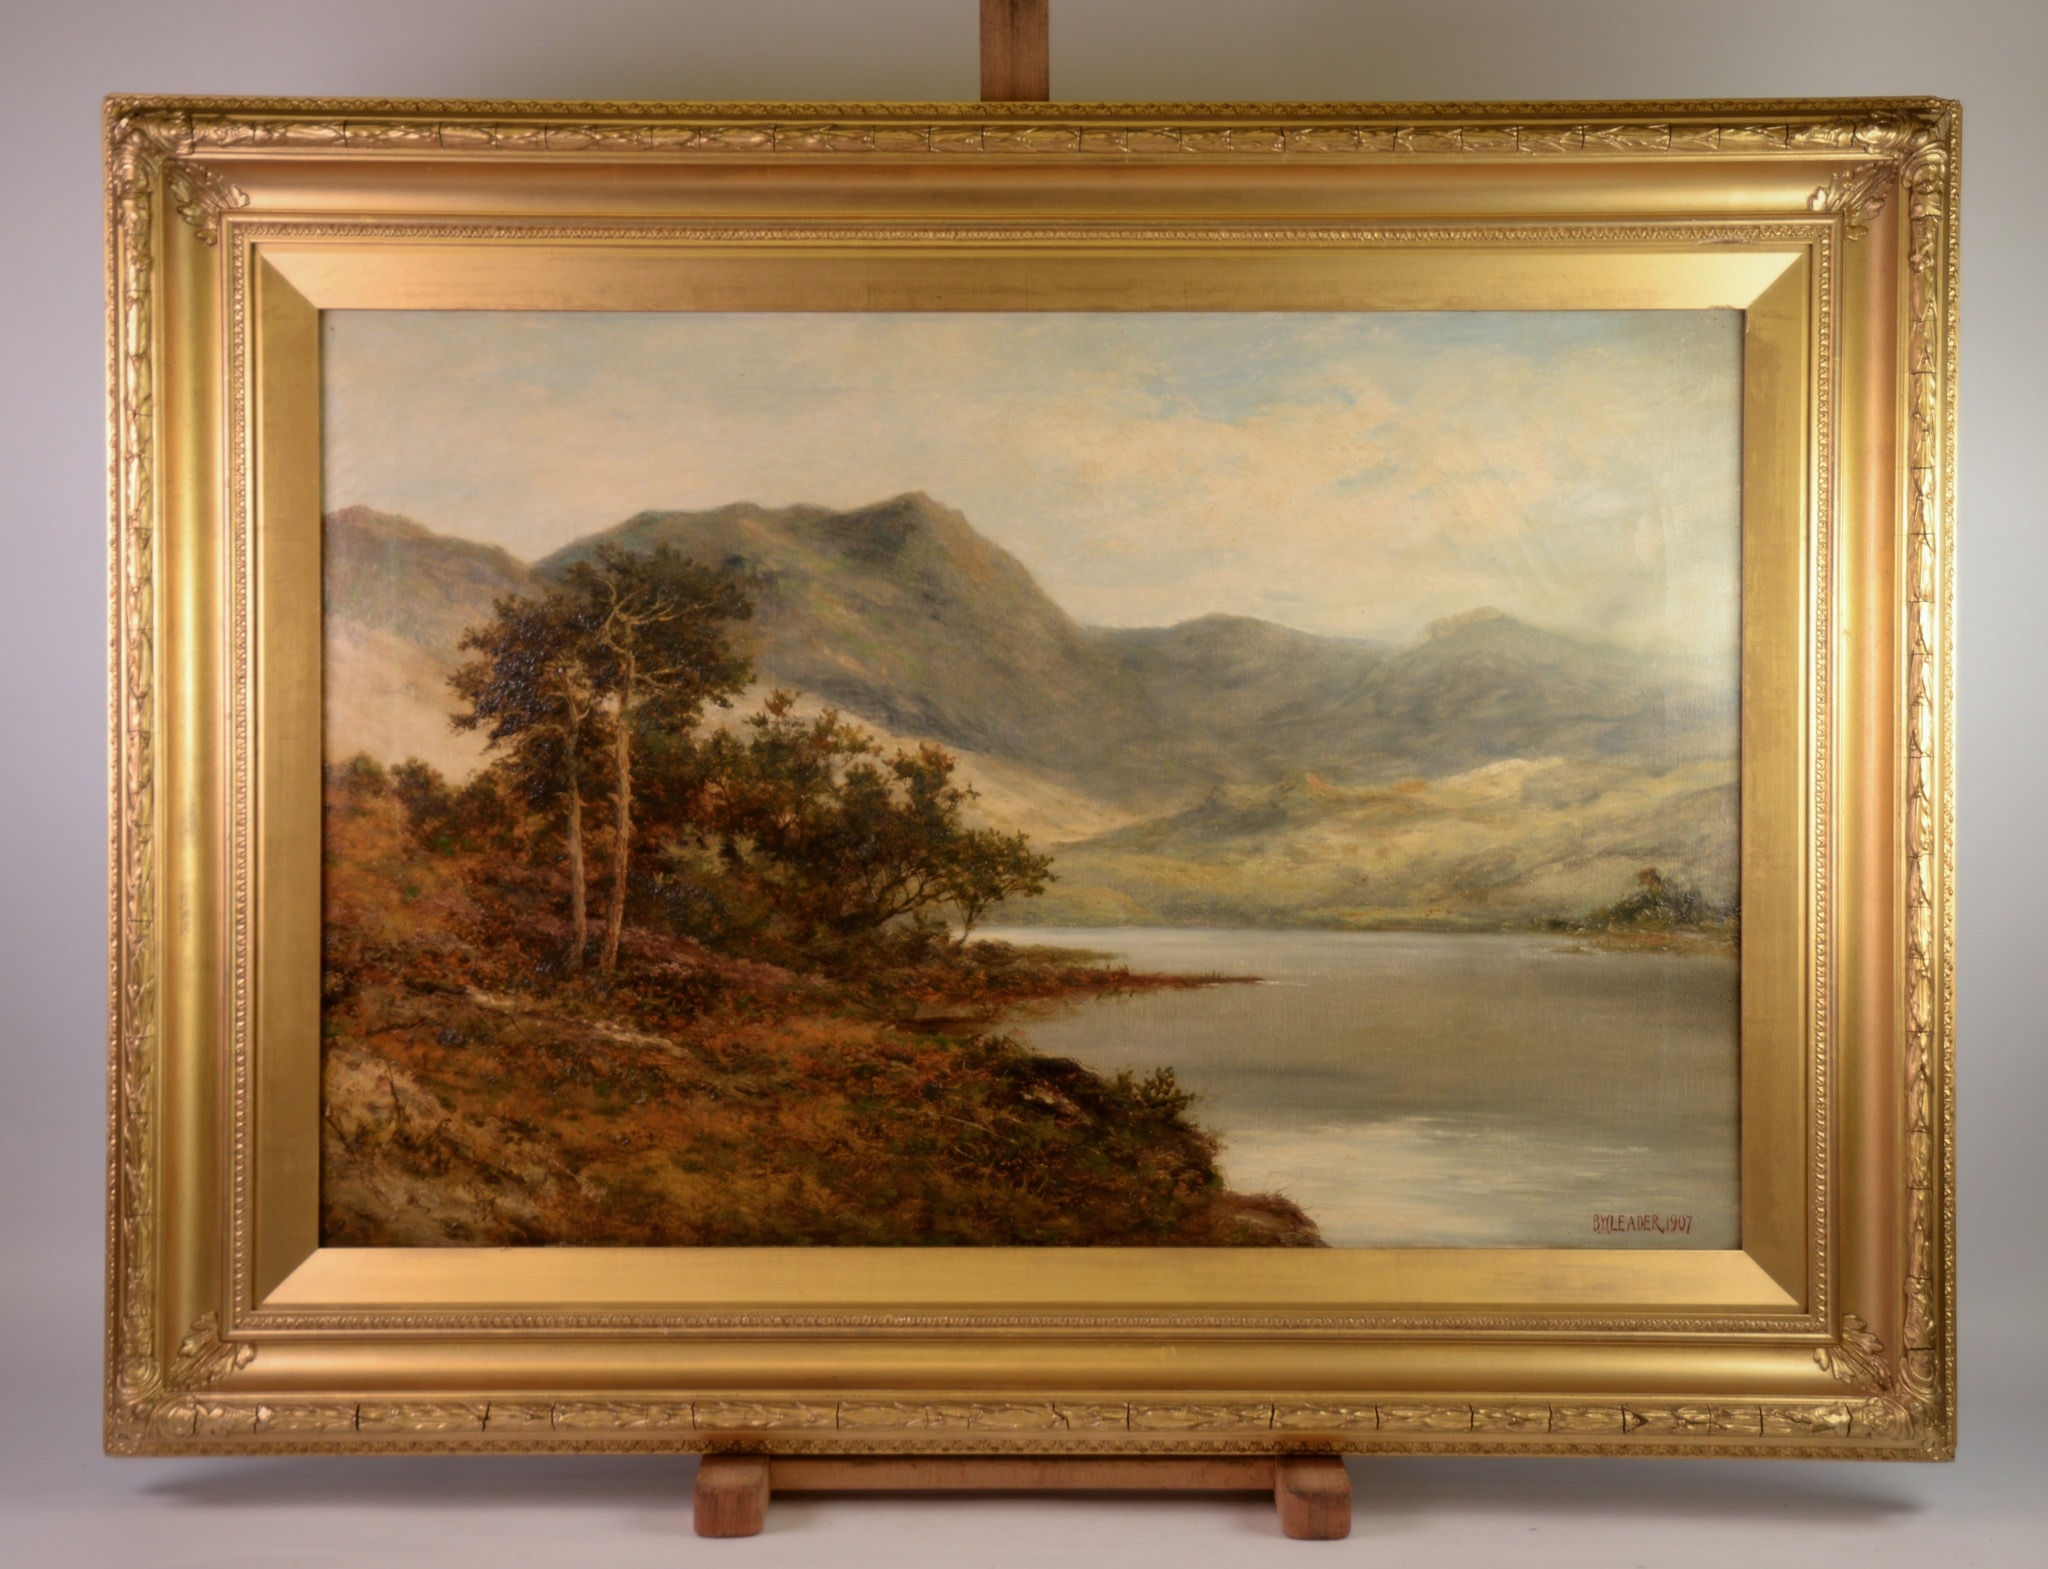 BENJAMIN WILLIAMS LEADER (1831 – 1923) OIL ON CANVAS Landscape with lake and mountains Signed and - Image 2 of 4